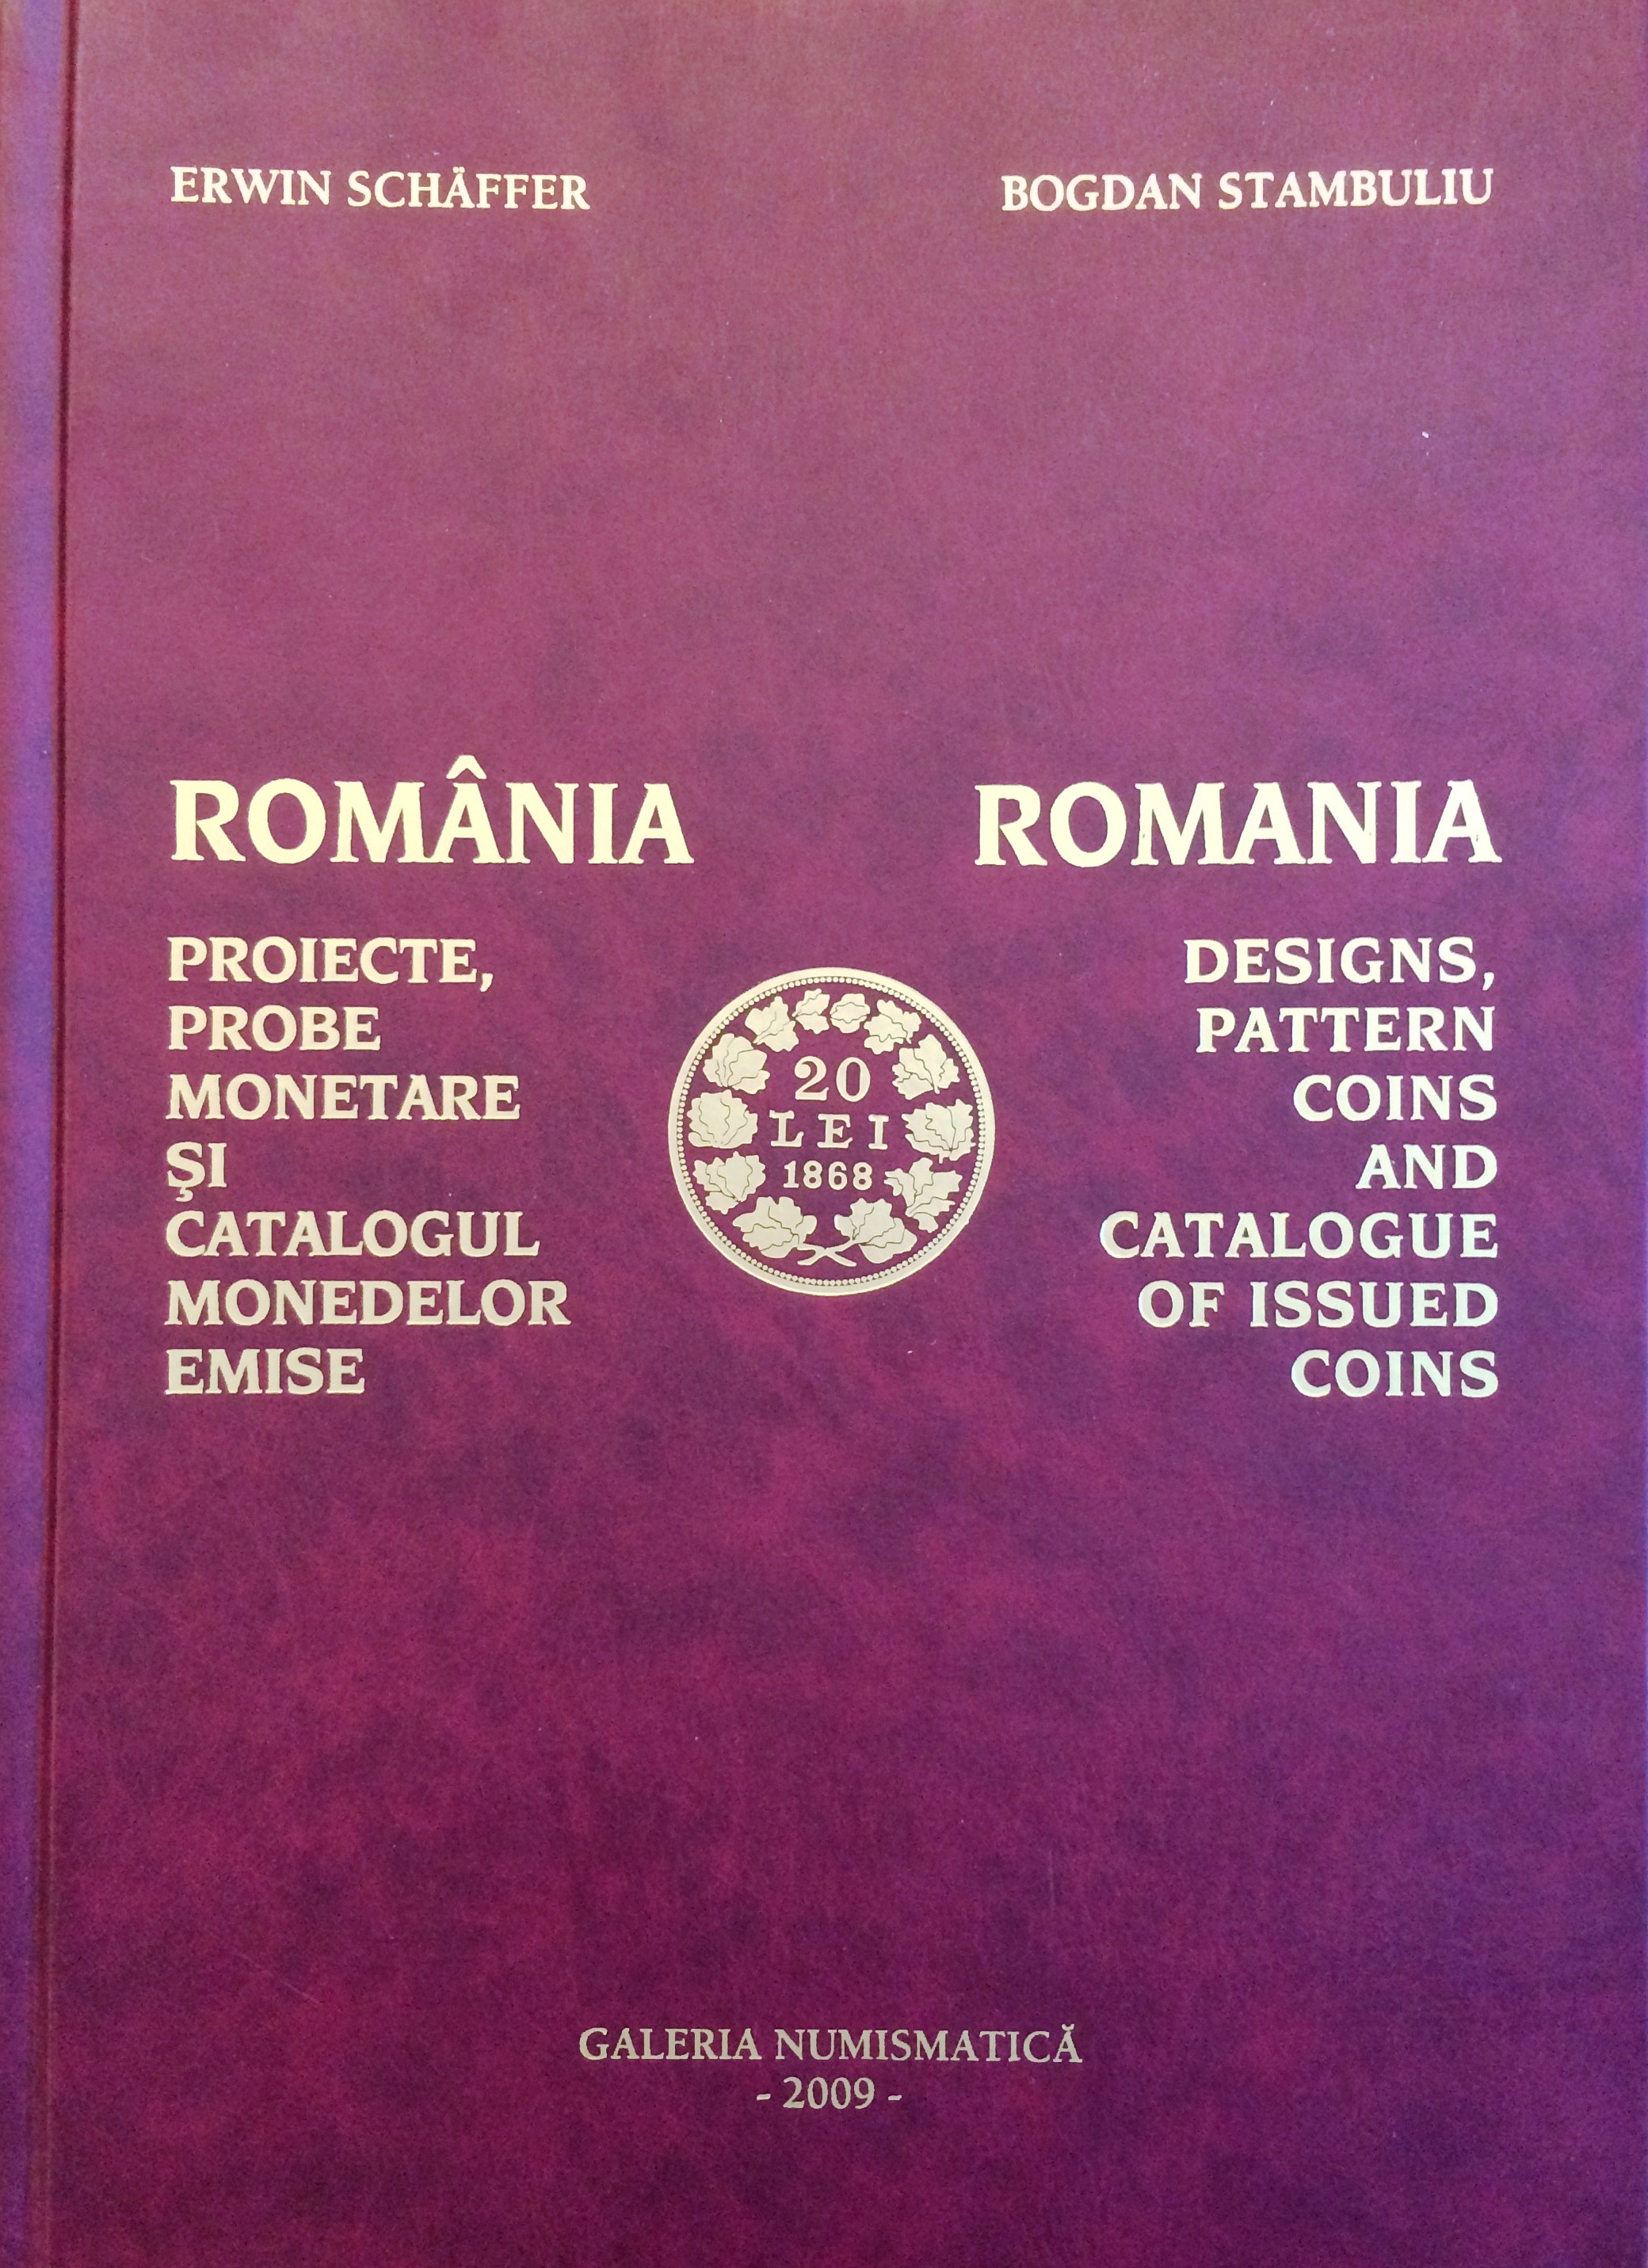 Romania - Designs,Pattern coins and catalogue of Issued coins